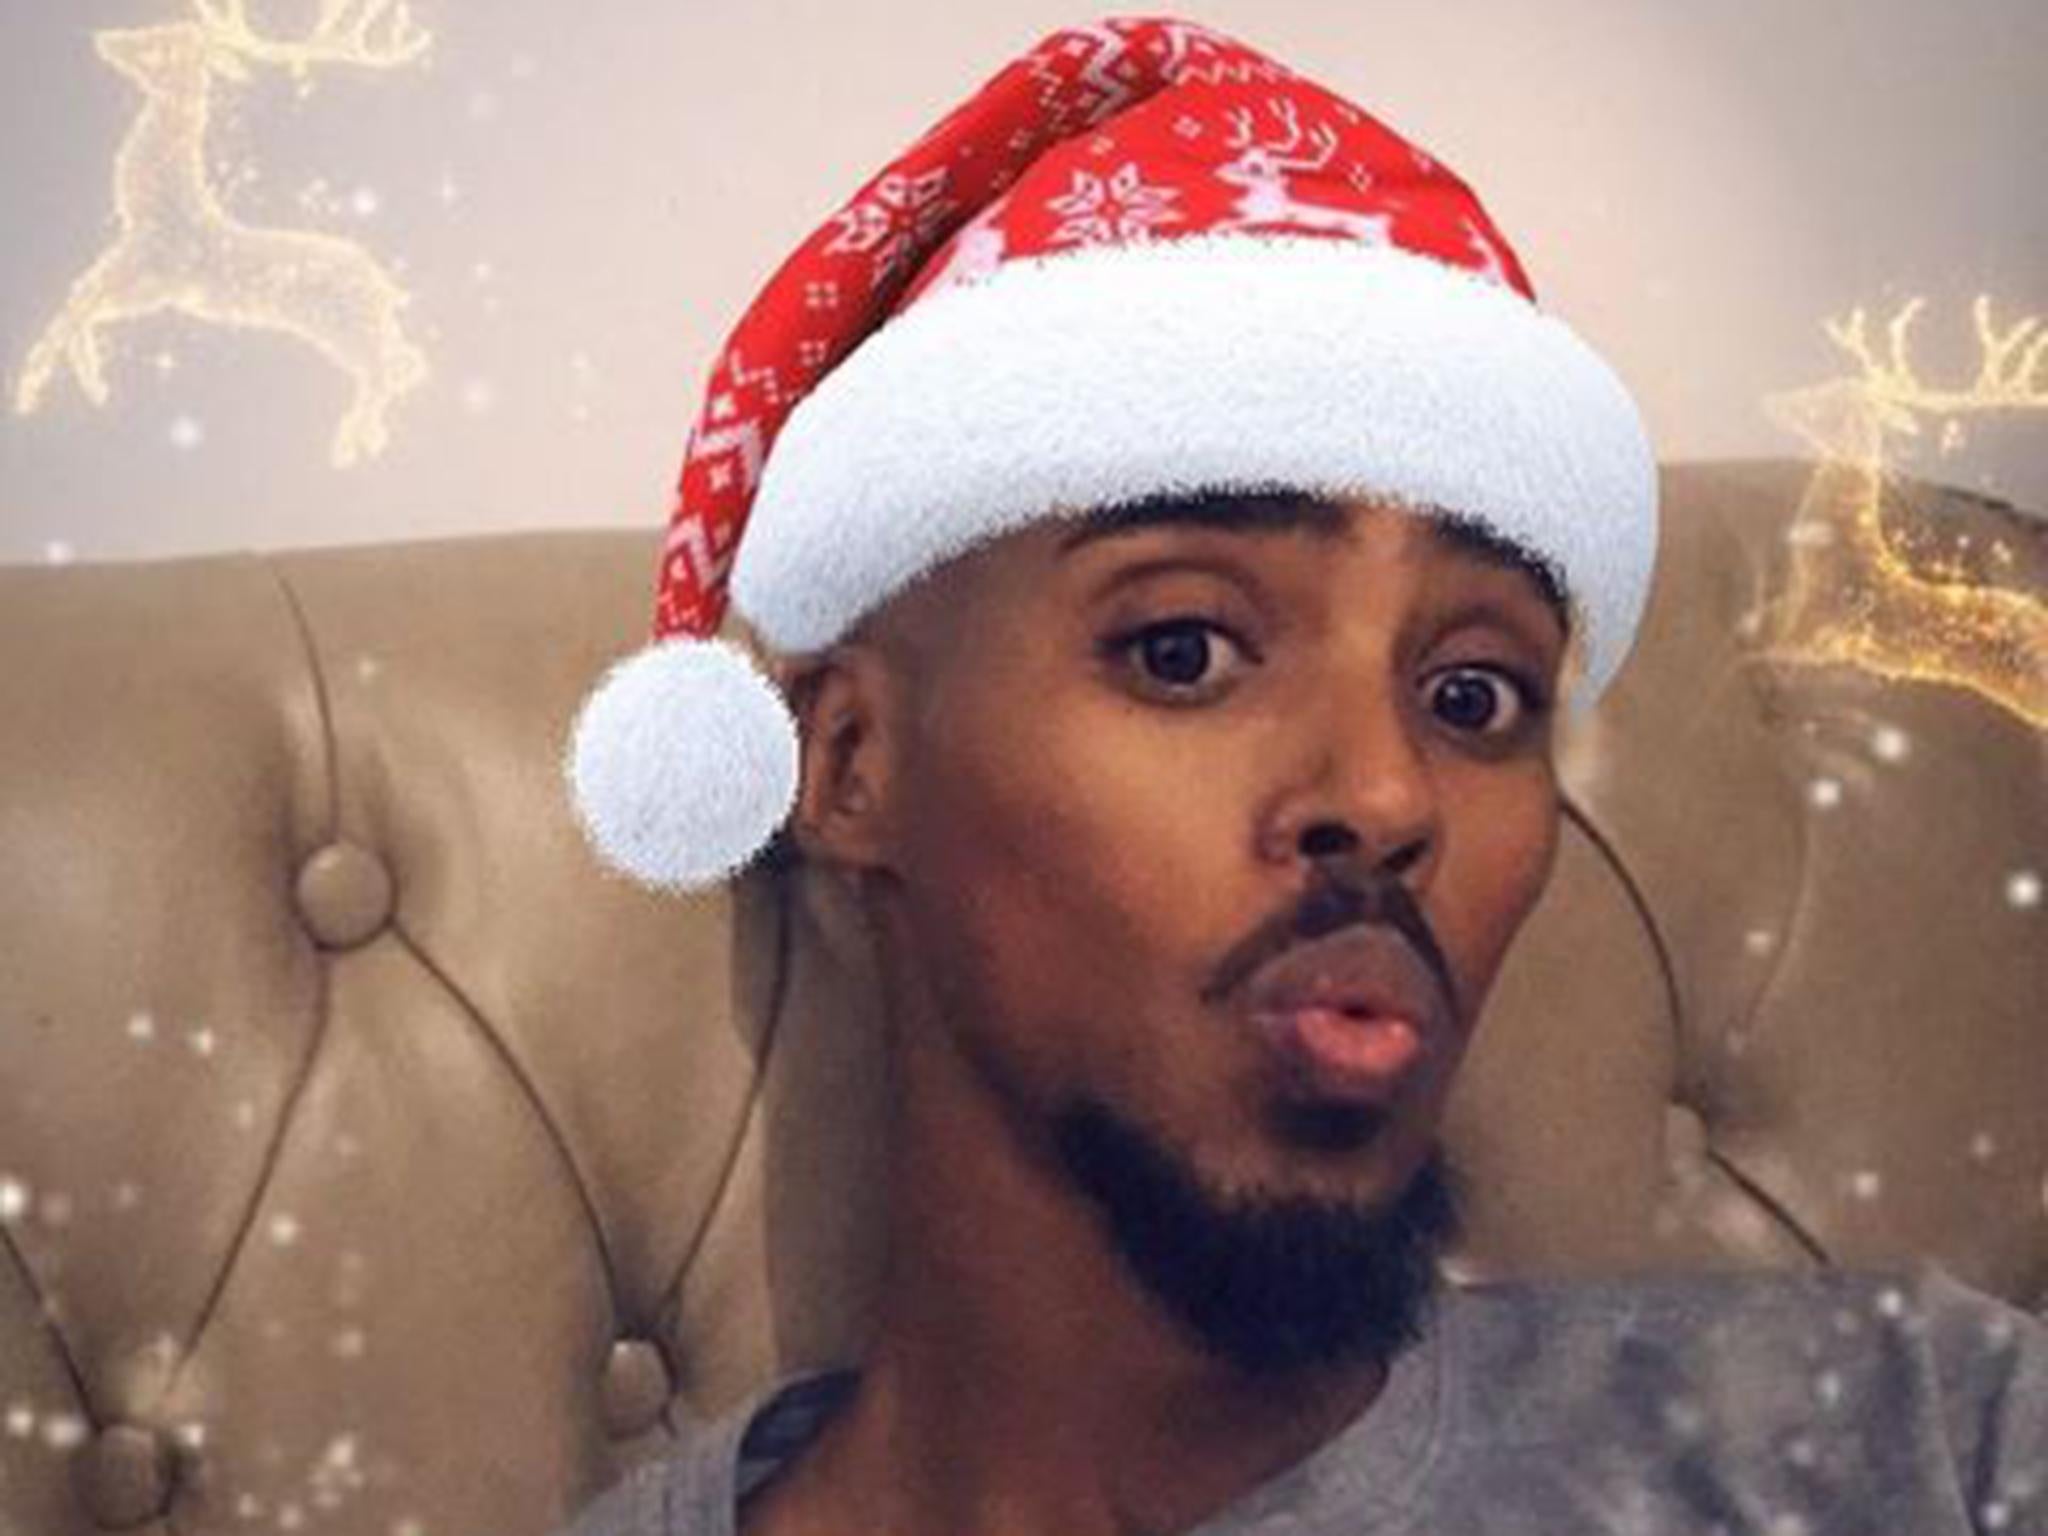 mo farah posted a merry christmas message on social media - muslim instagram followers